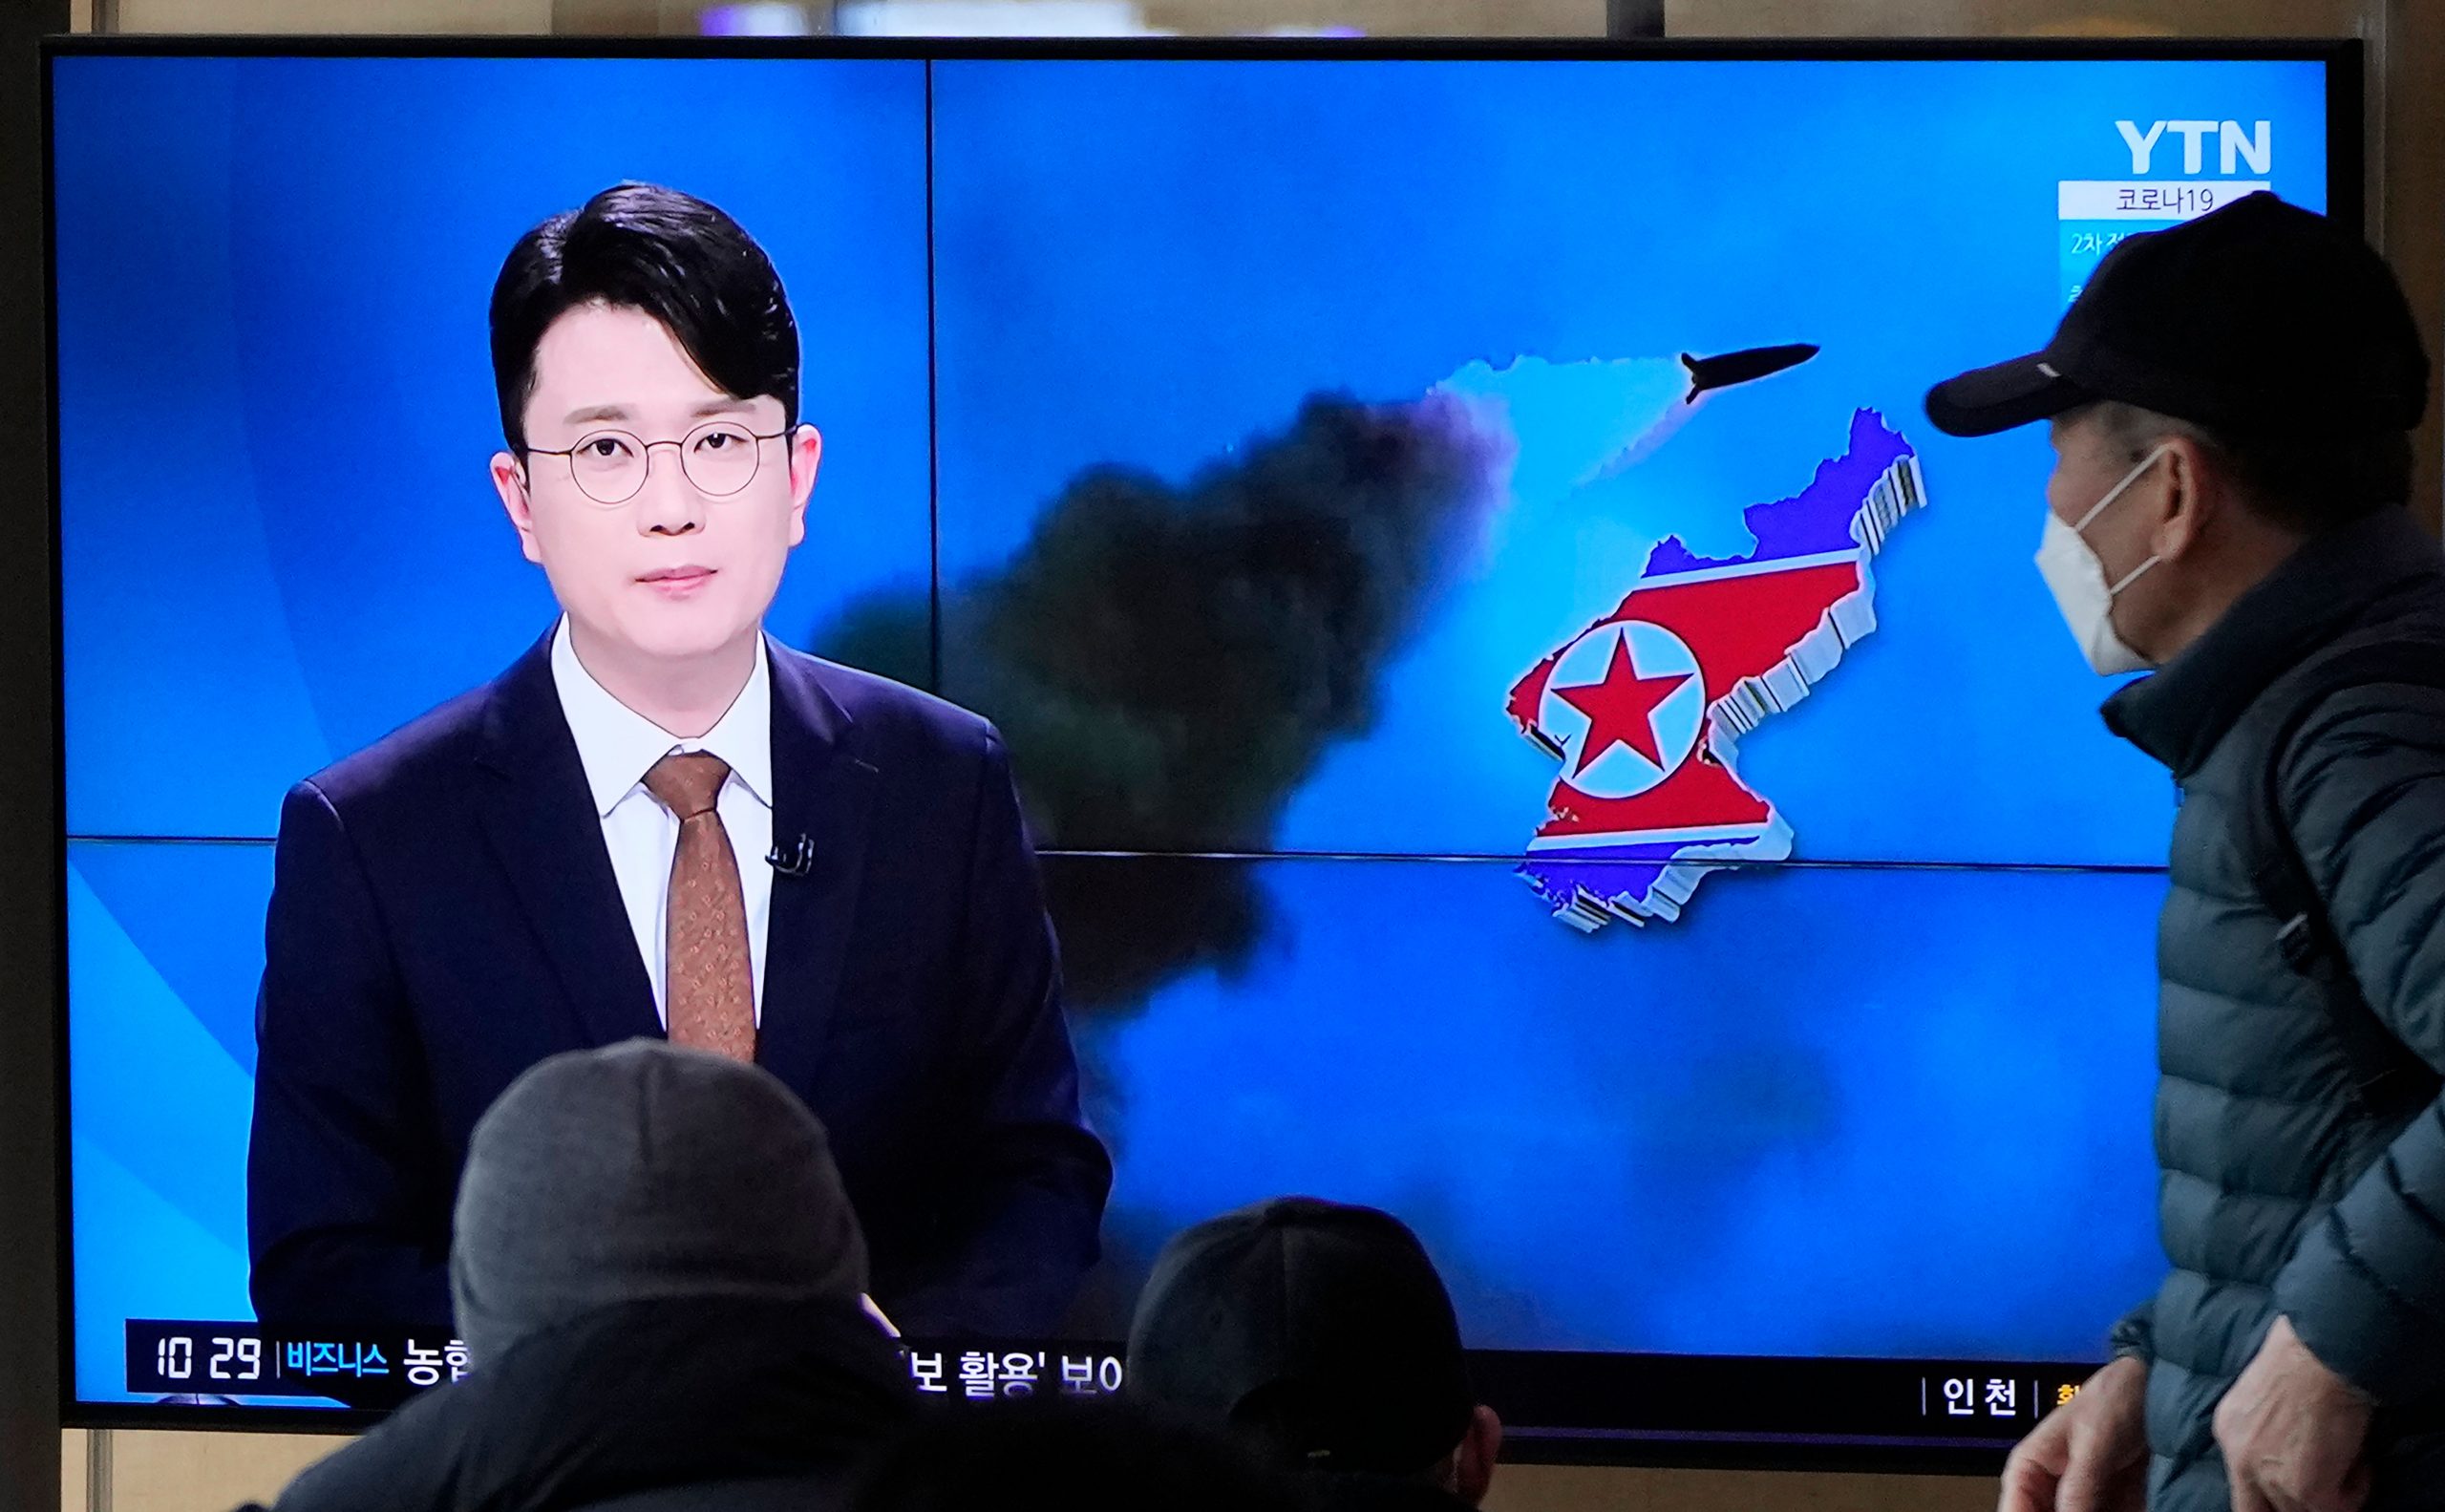 North Korea conducts ‘important’ satellite test after missile firing